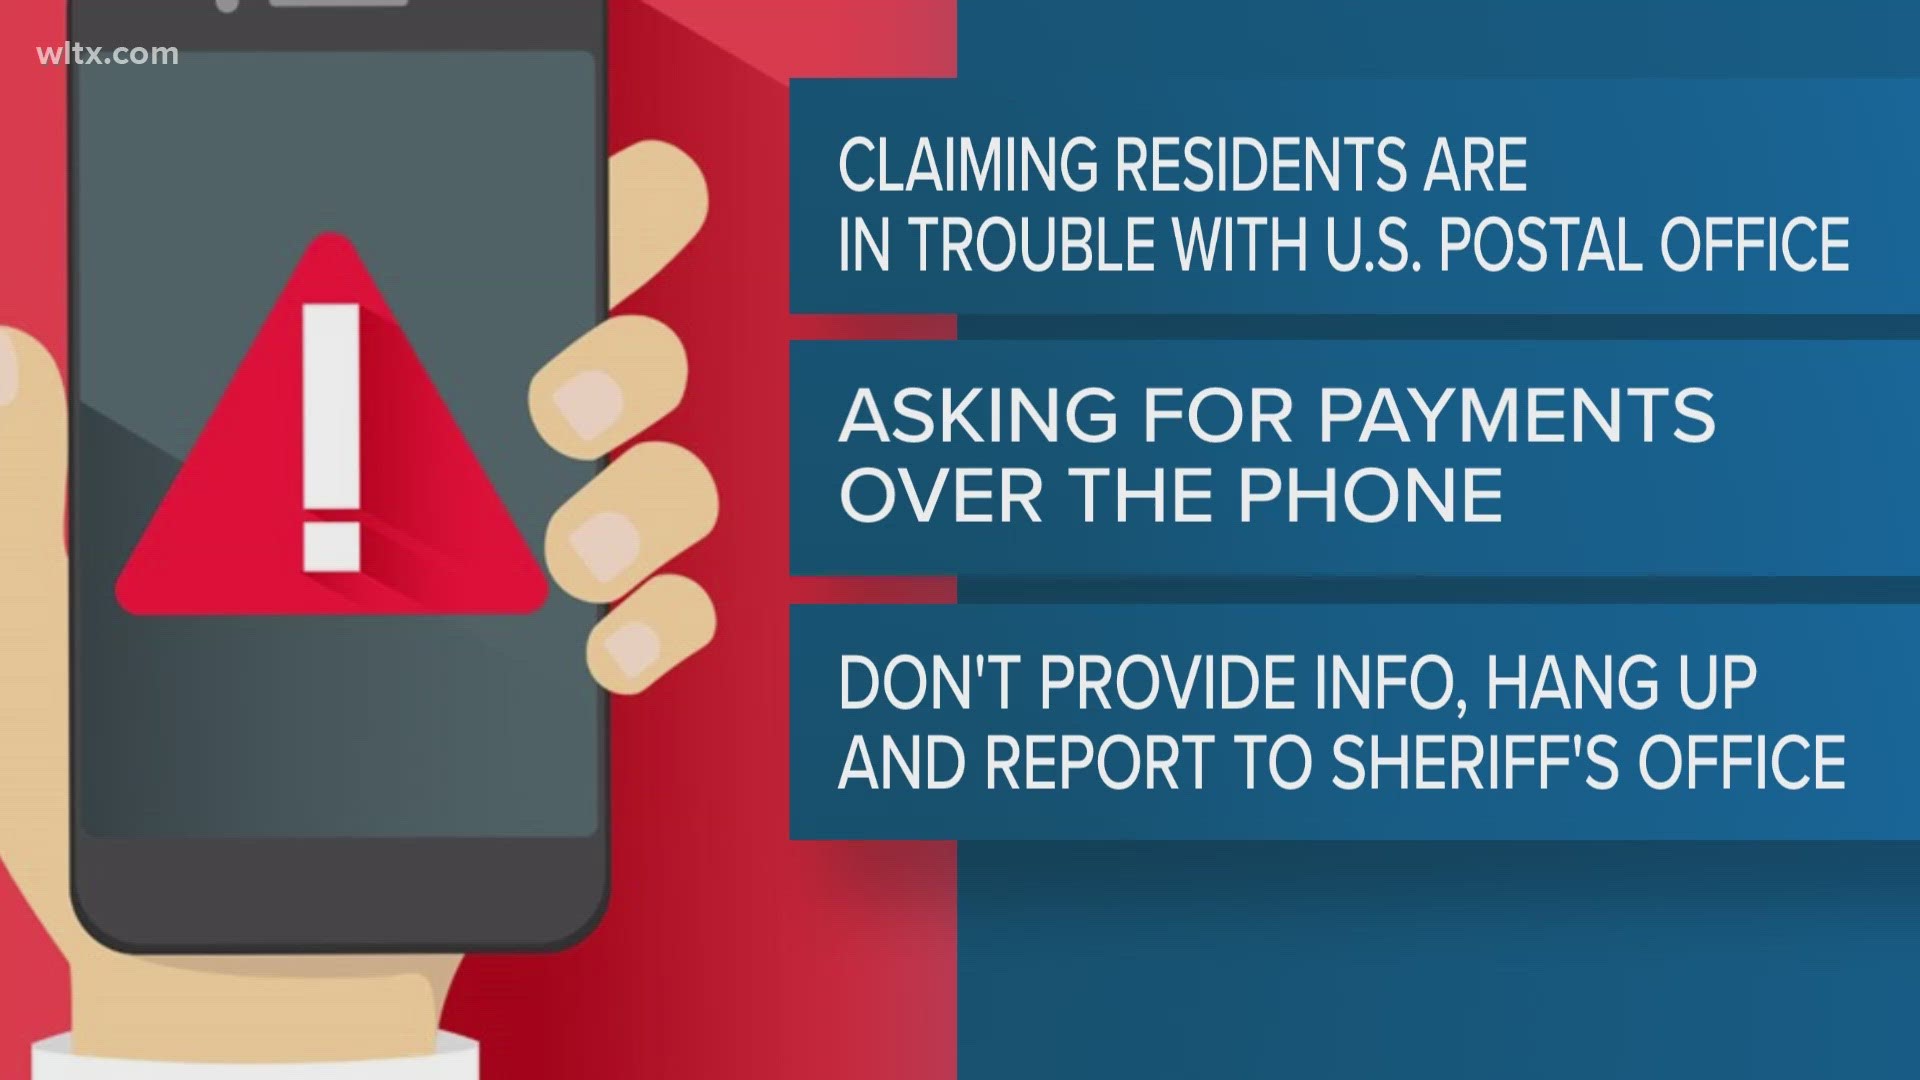 The callers say that residents could get in trouble with the U.S. Post office and by paying money can get out of it.